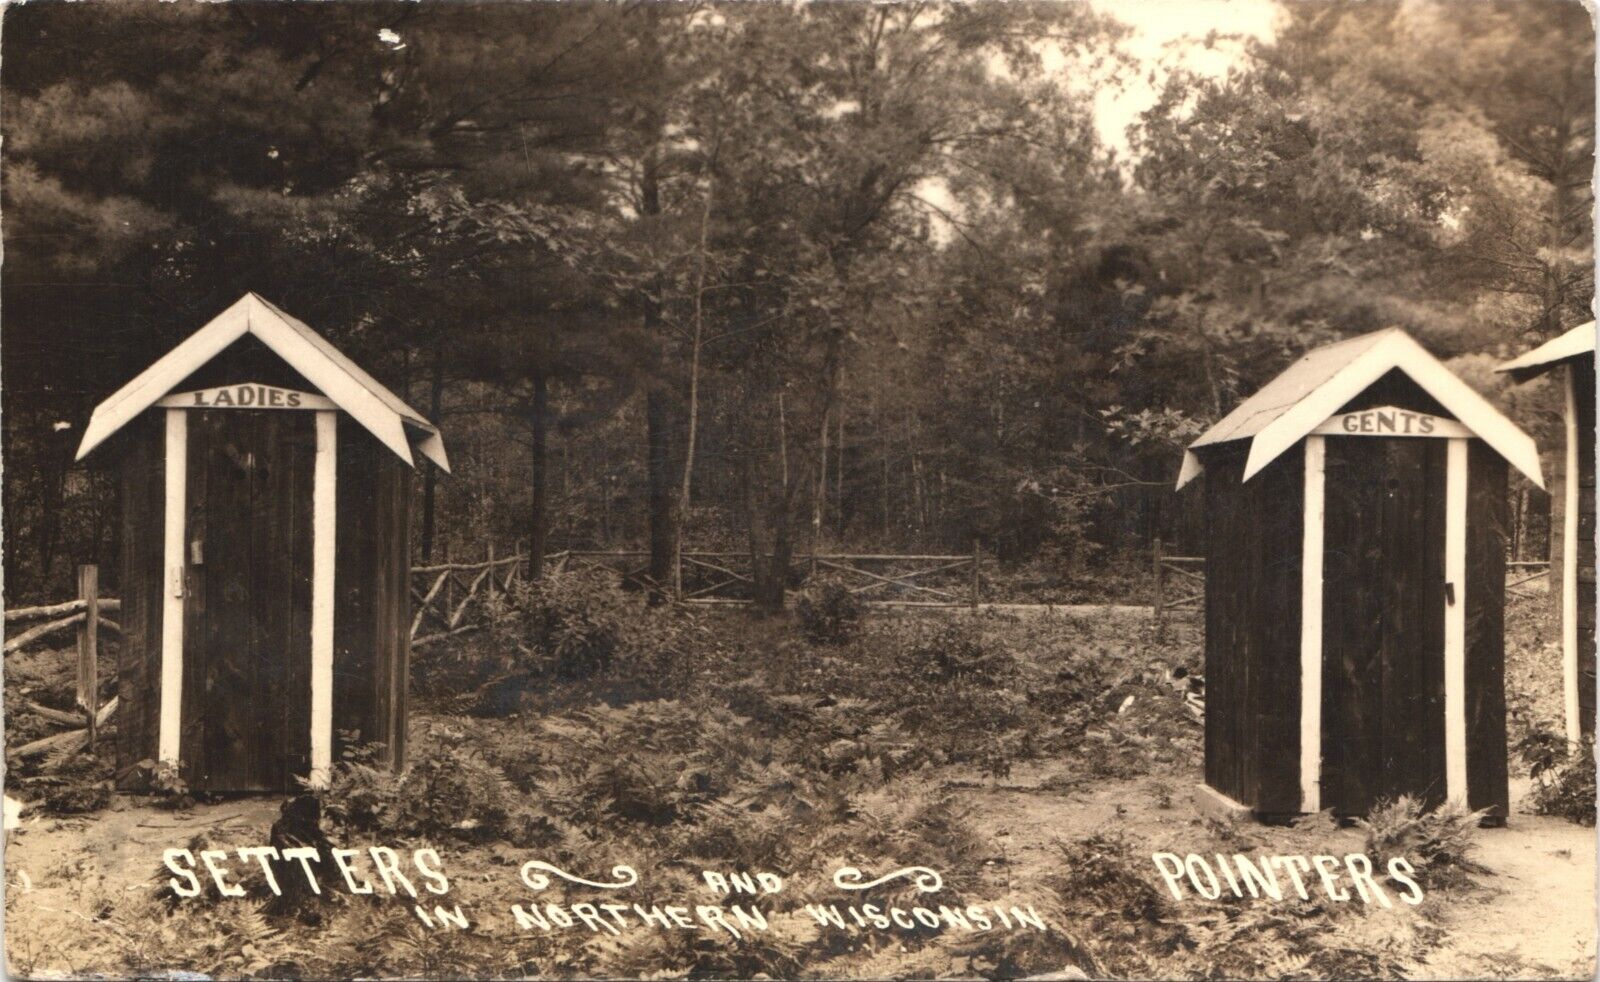 POINTERS & SETTERS real photo postcard rppc NORTHERN WISCONSIN WI 1940s outhouse